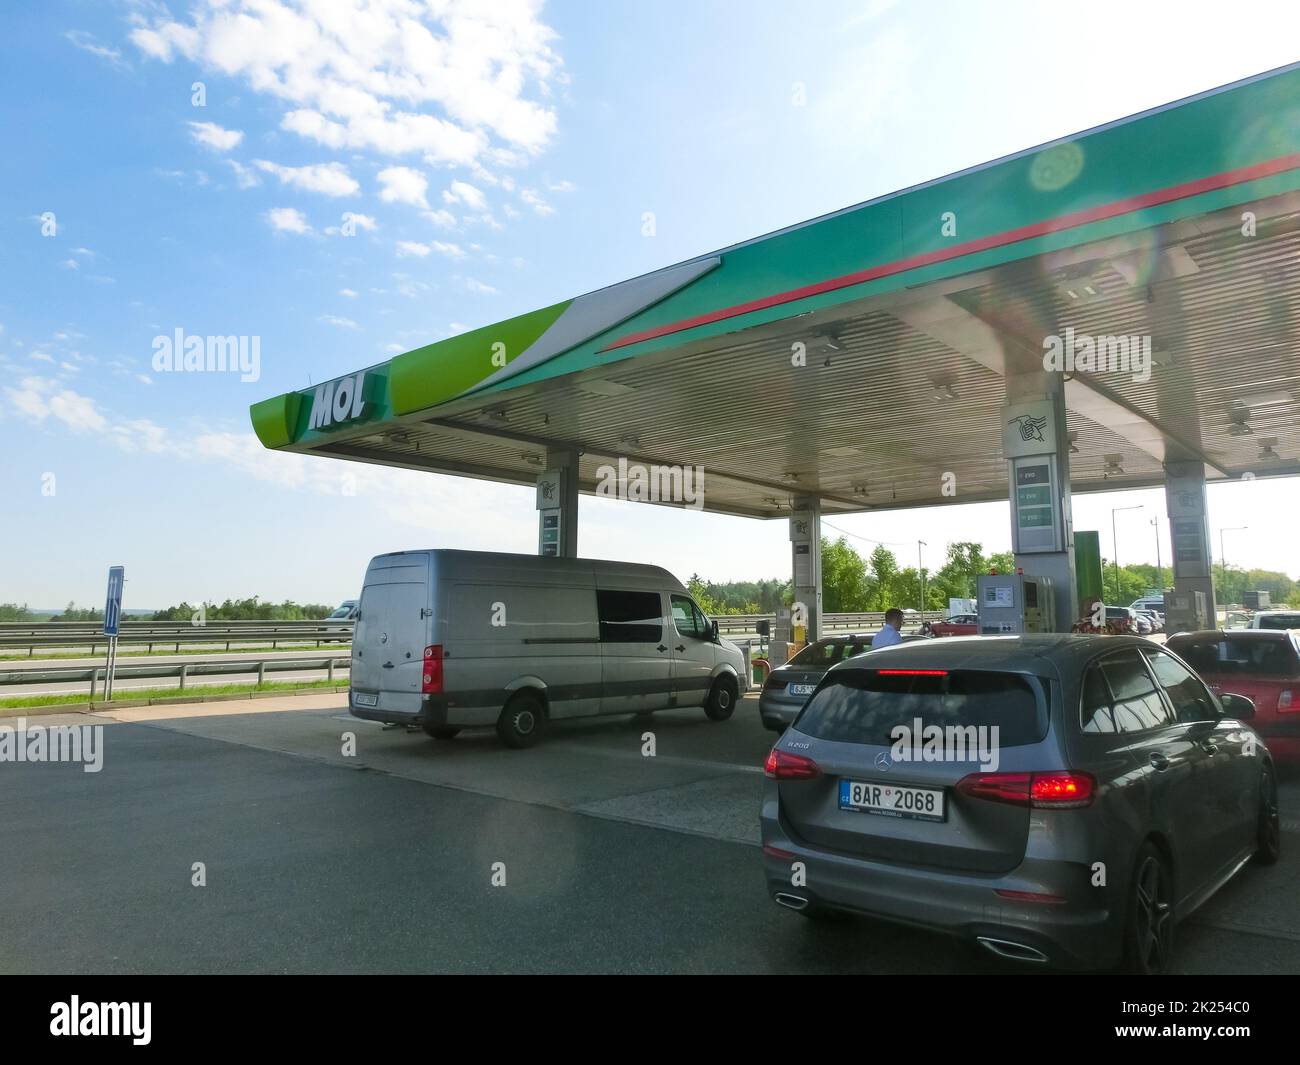 Prague, Czech Republic - May 12, 2022: MOL gas station. The company has replace Agip gas stations. Stock Photo